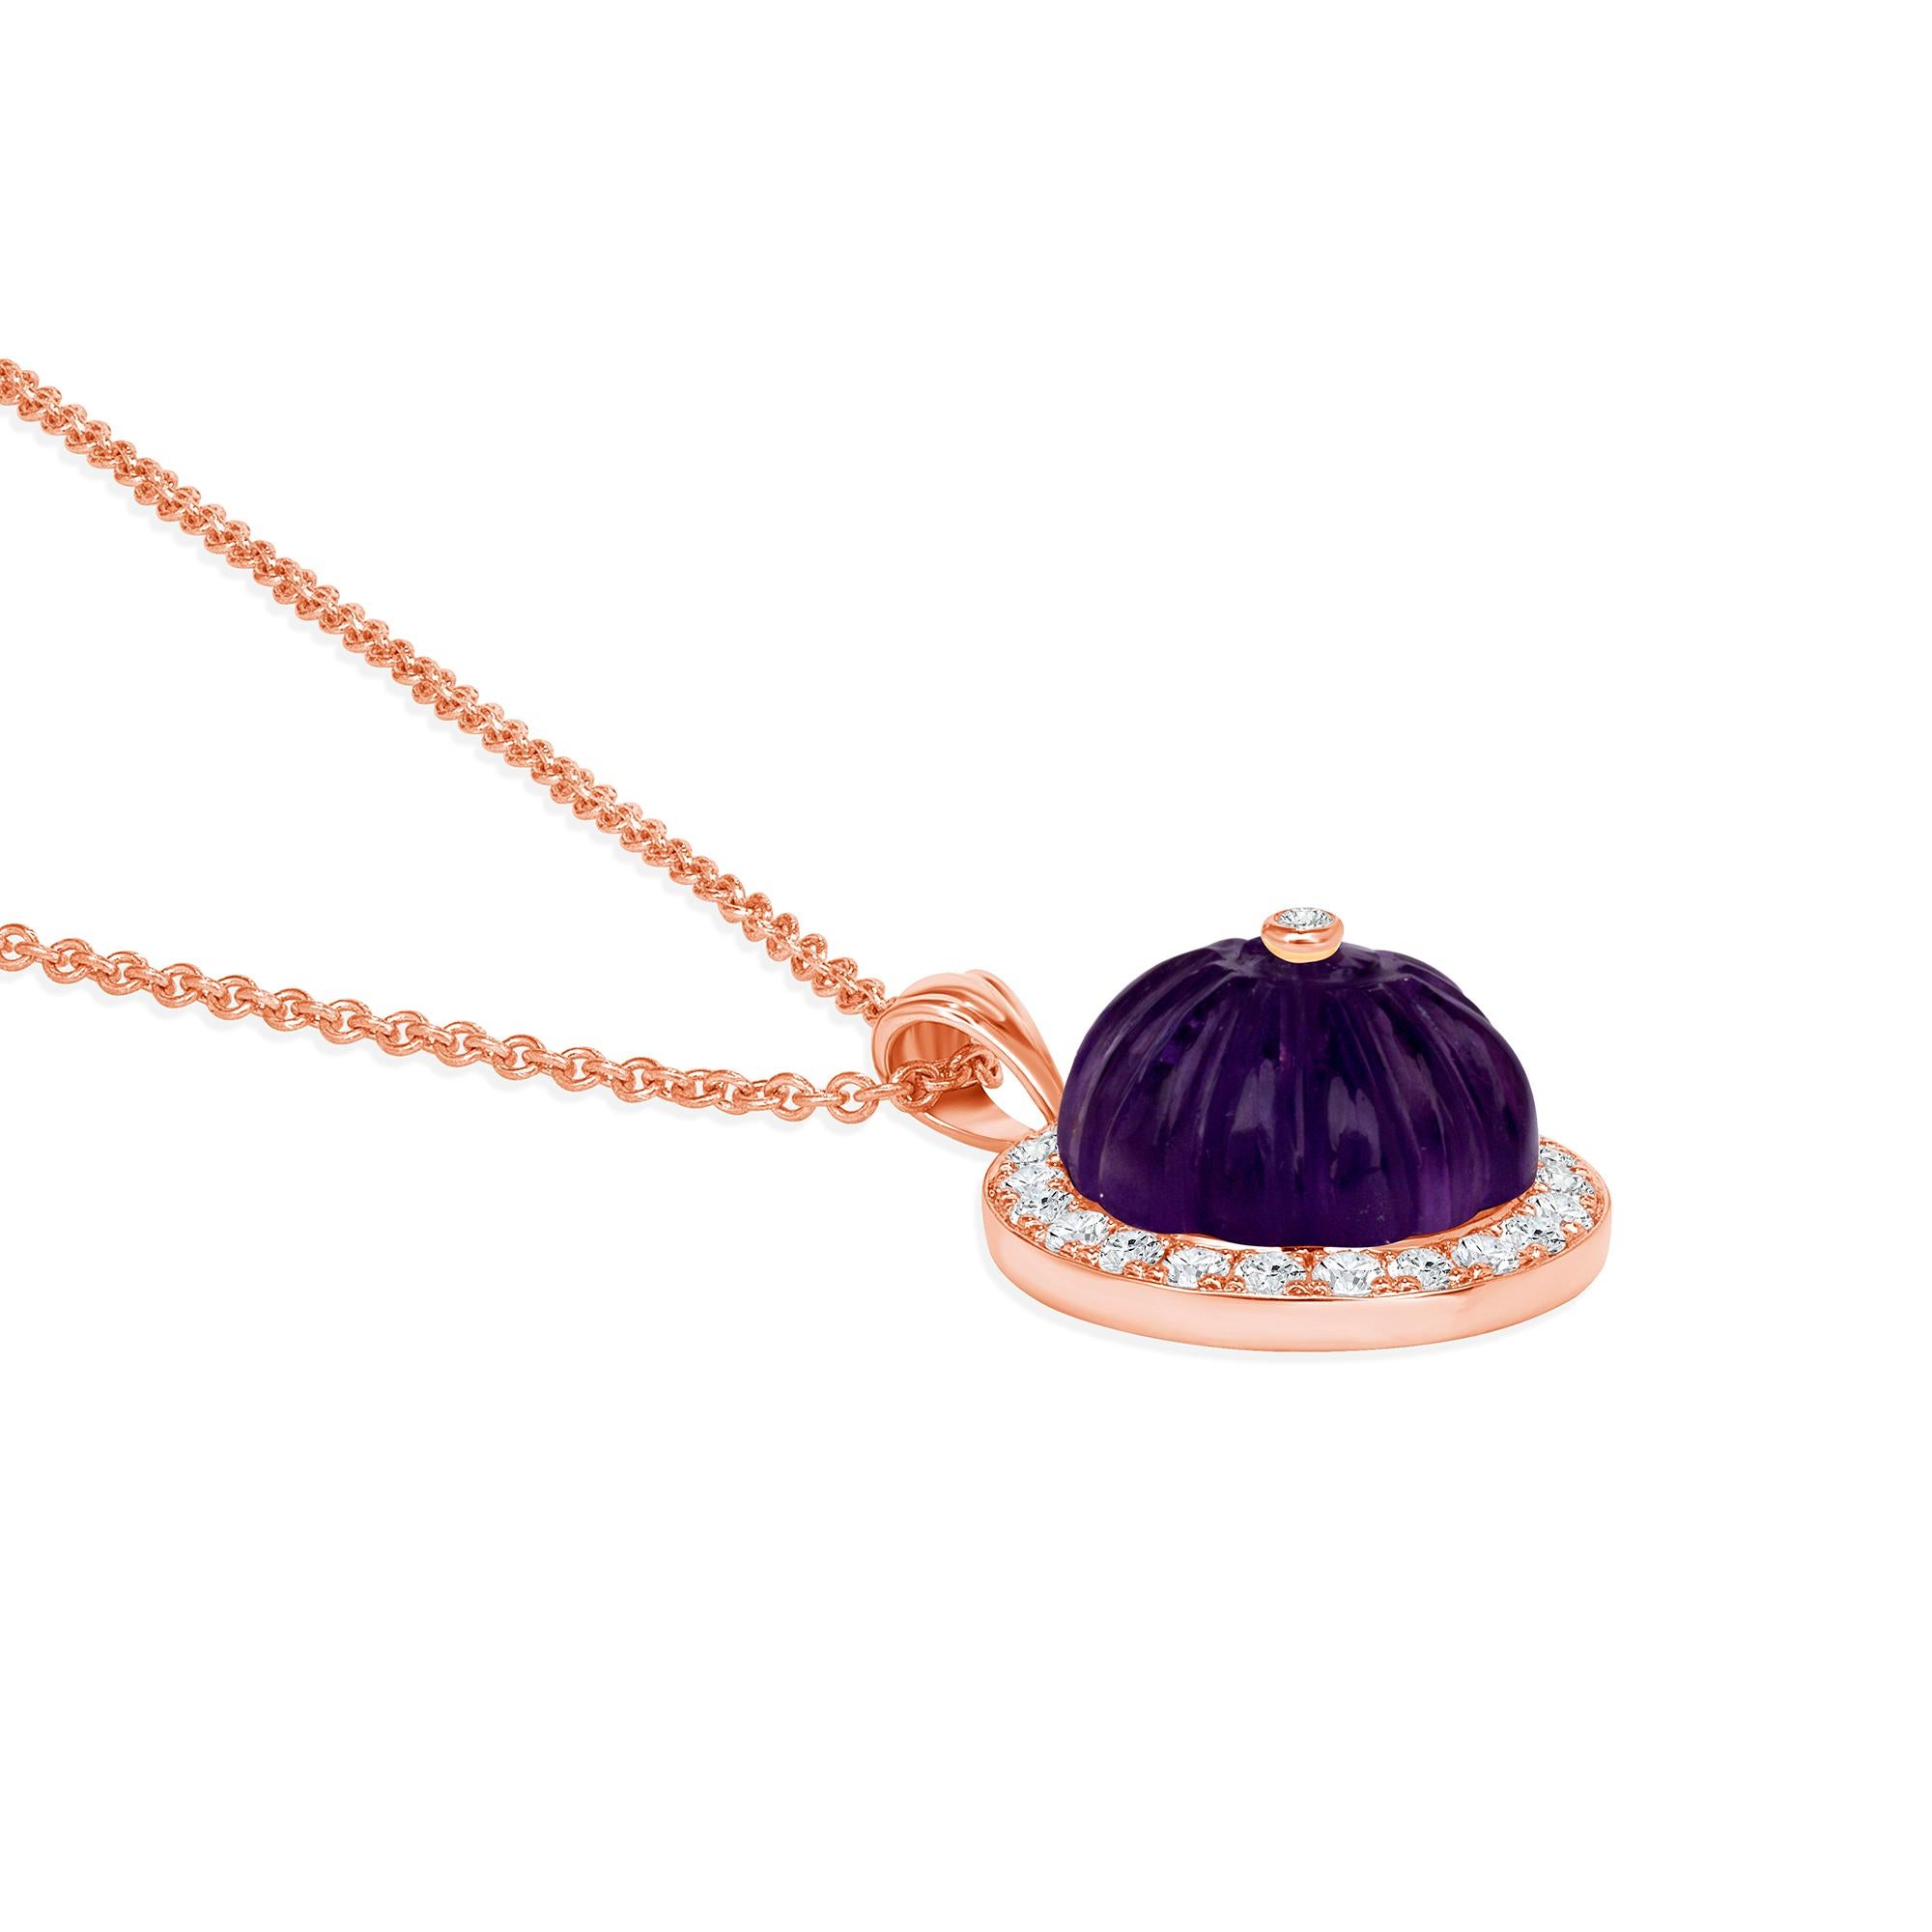 Indulge in the timeless allure of this pendant, expertly crafted in 14k gold and adorned with captivating Amethyst and sparkling diamonds. Radiating elegance and charm, this pendant complements any outfit, seamlessly transitioning from day to night